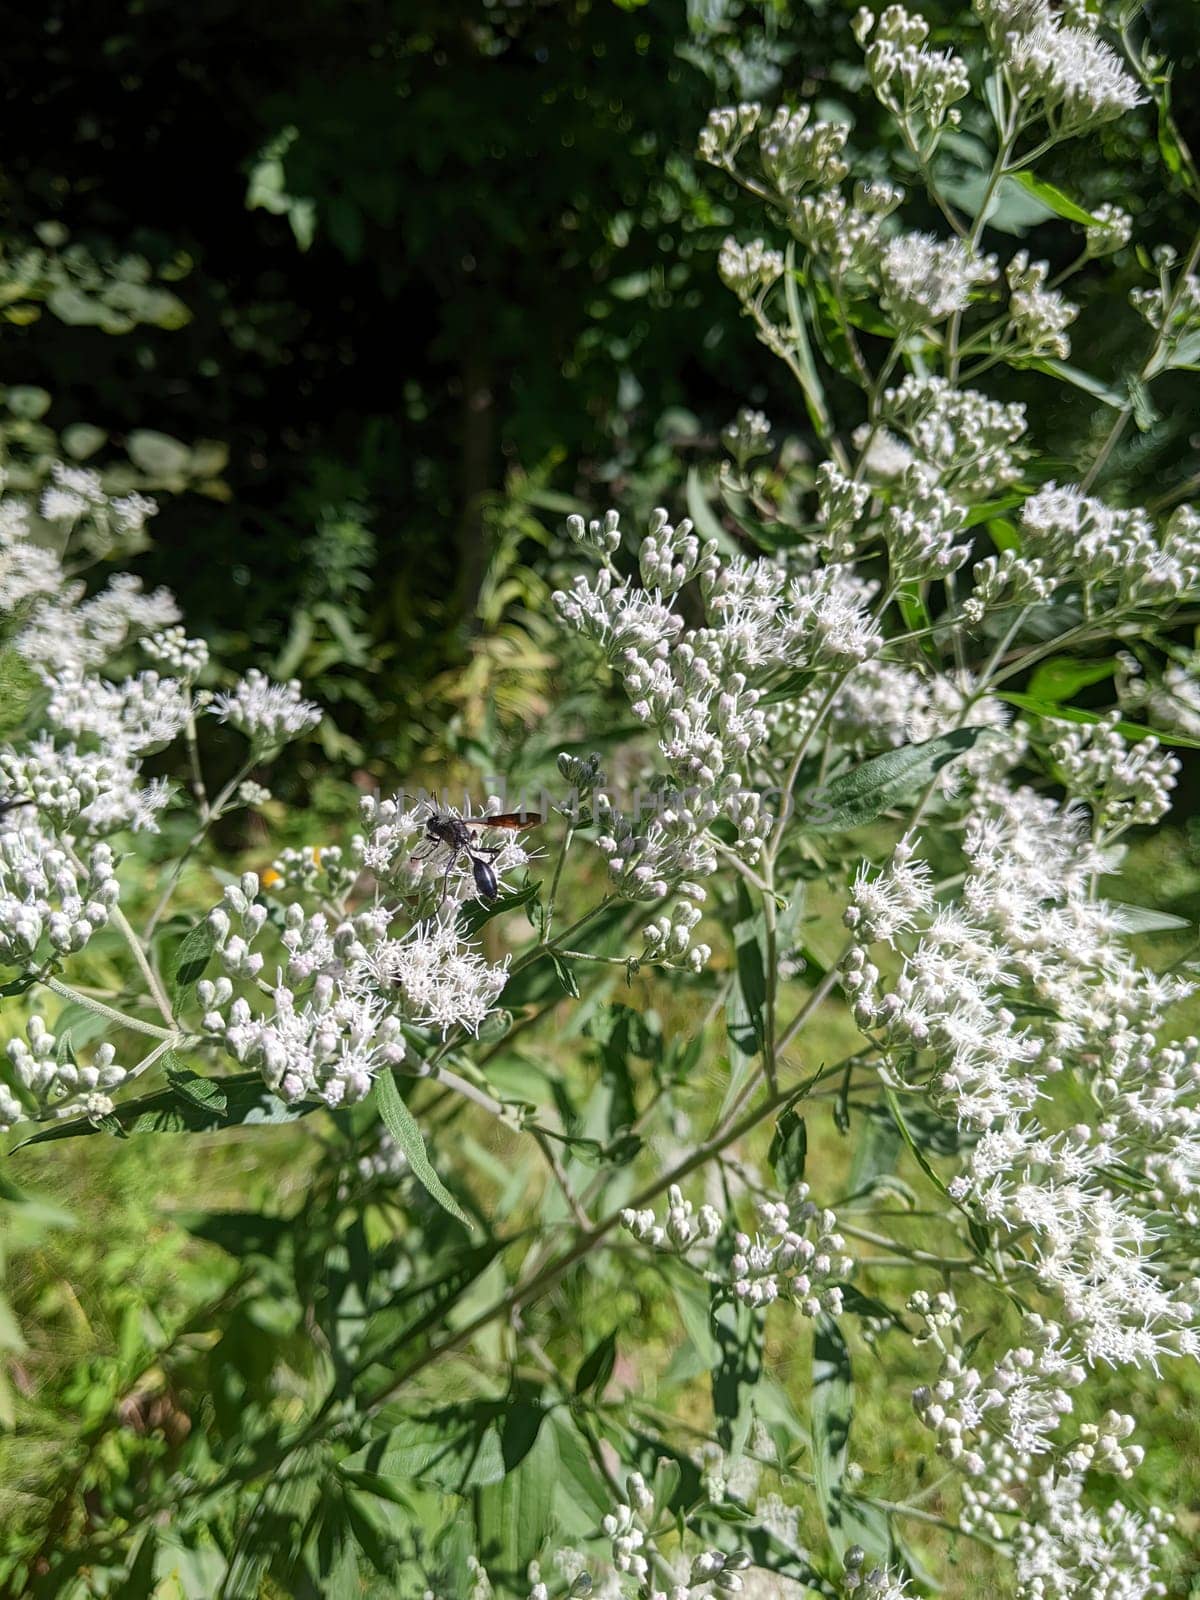 Bee Gathering Nectar from Delicate White Flowers in a Sunny Muncie, Indiana Garden